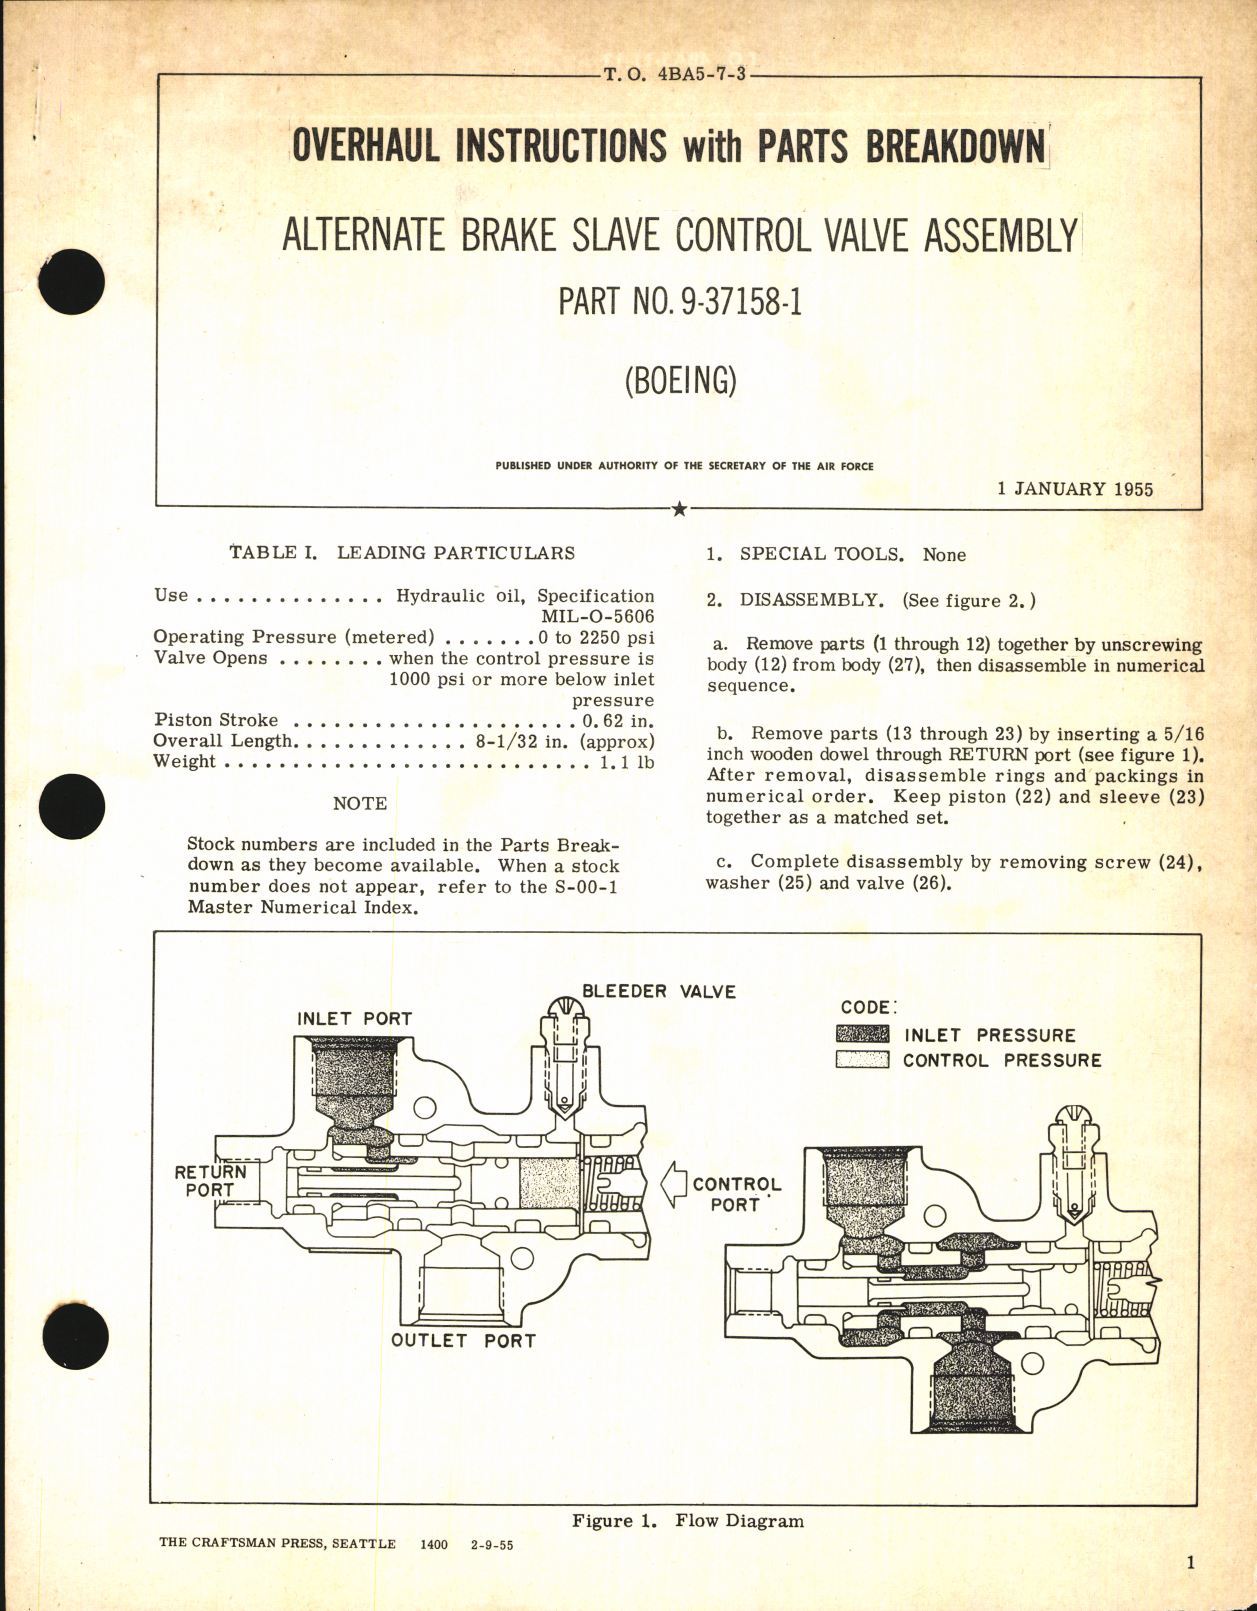 Sample page 1 from AirCorps Library document: Overhaul Instructions with Parts Breakdown for Alternate Brake Slave Control Valve Assembly